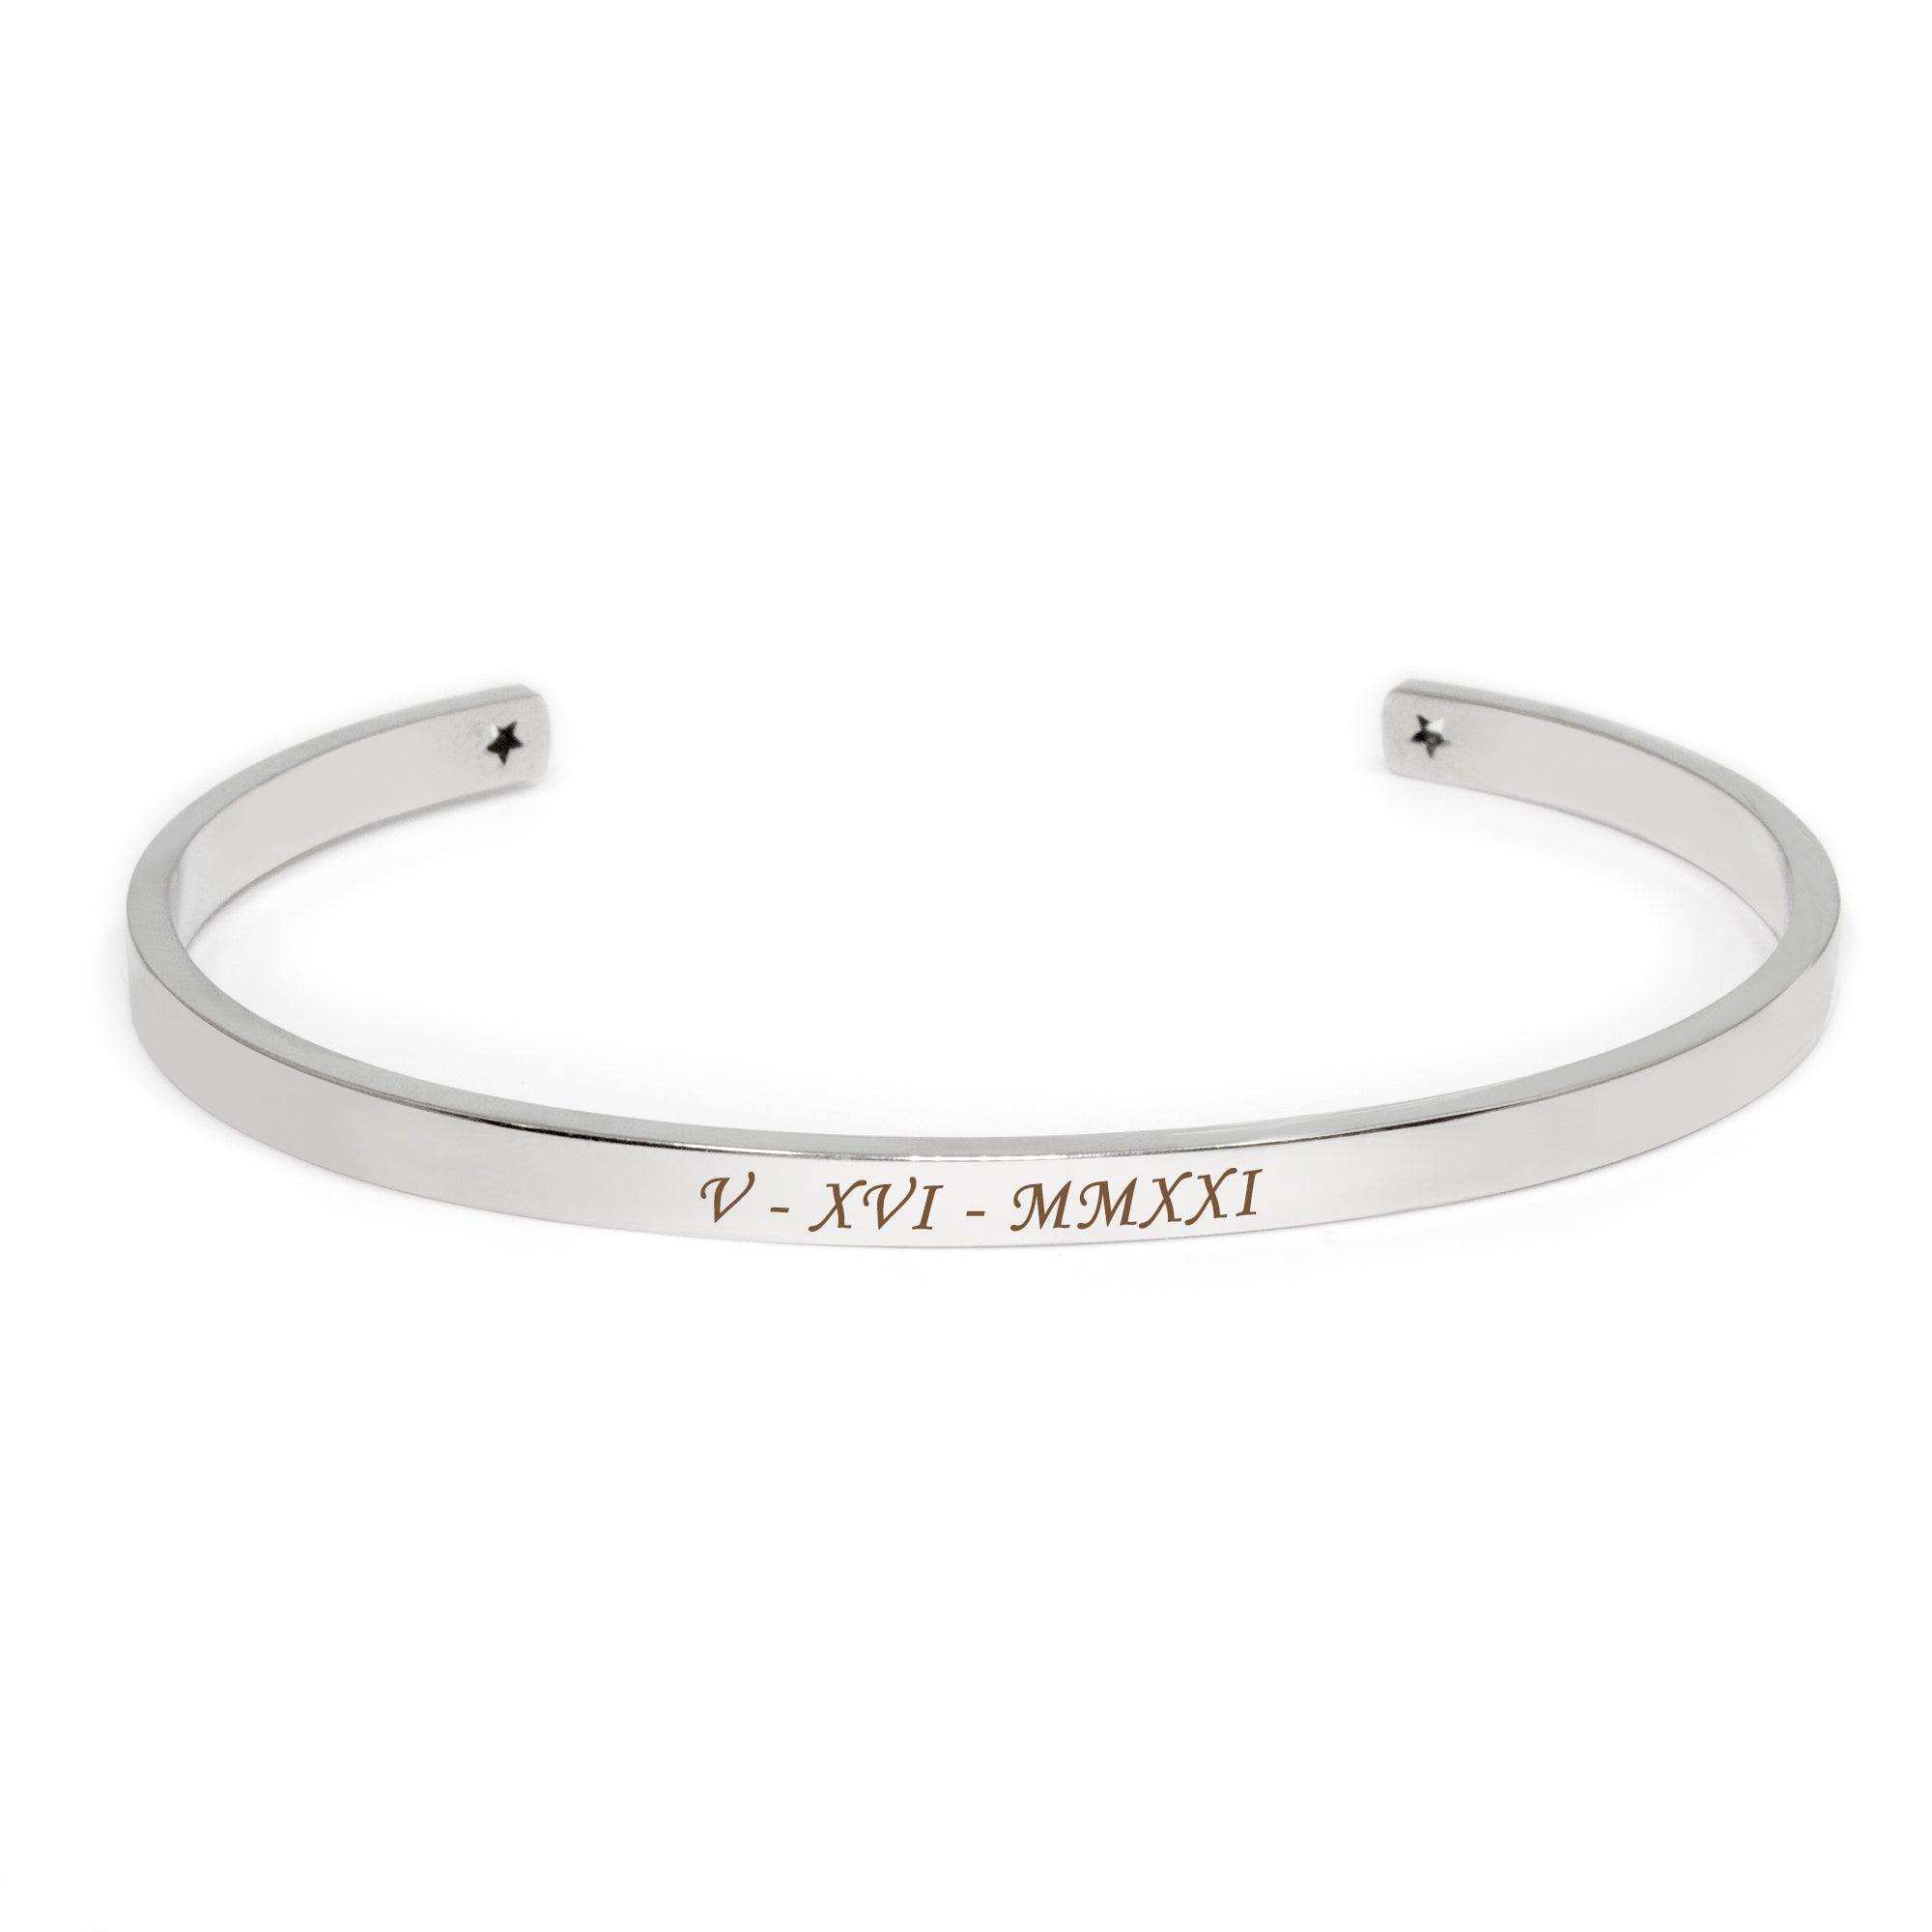 Minimalist Unisex Personalized Jewelry Cuff Bracelet at Rs 450/piece in  Jaipur